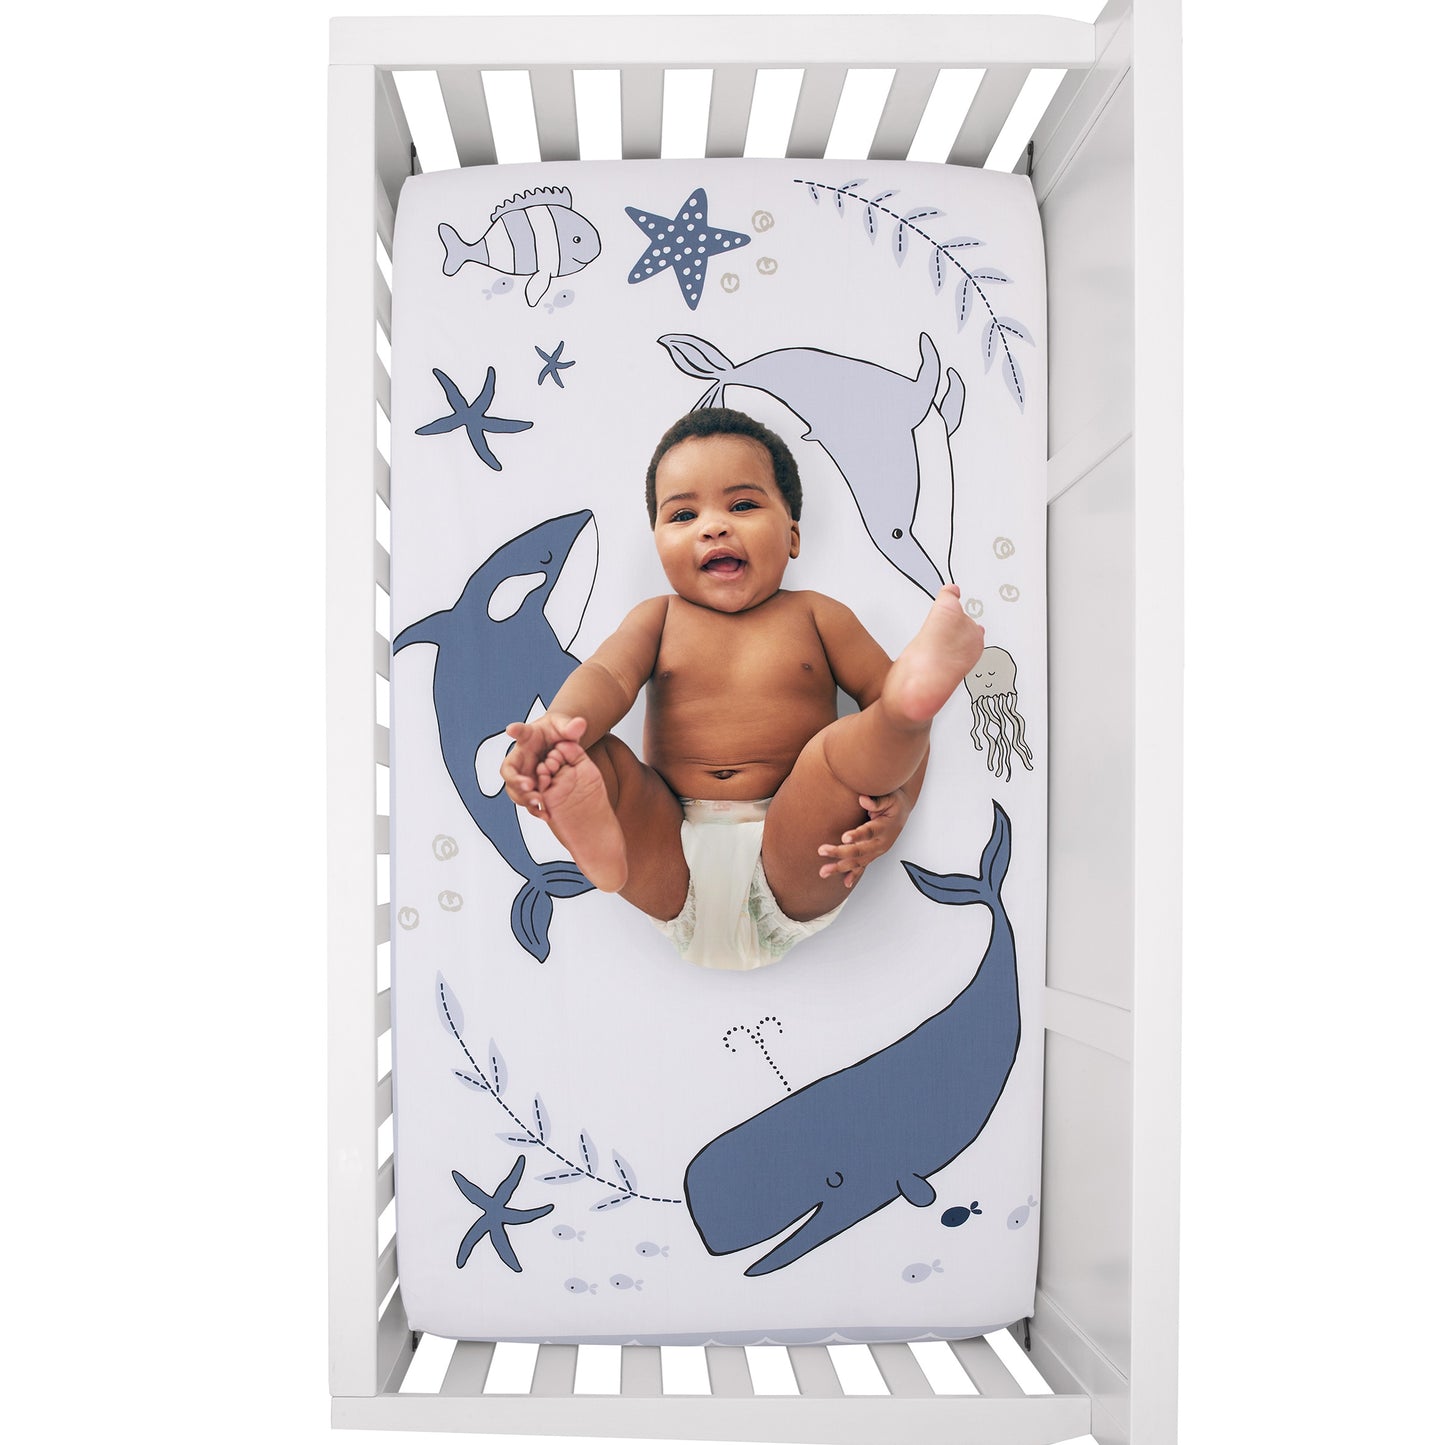 NoJo Marine Navy, Light Blue, and White Ocean Friends 100% Cotton Nursery Photo Op Fitted Crib Sheet